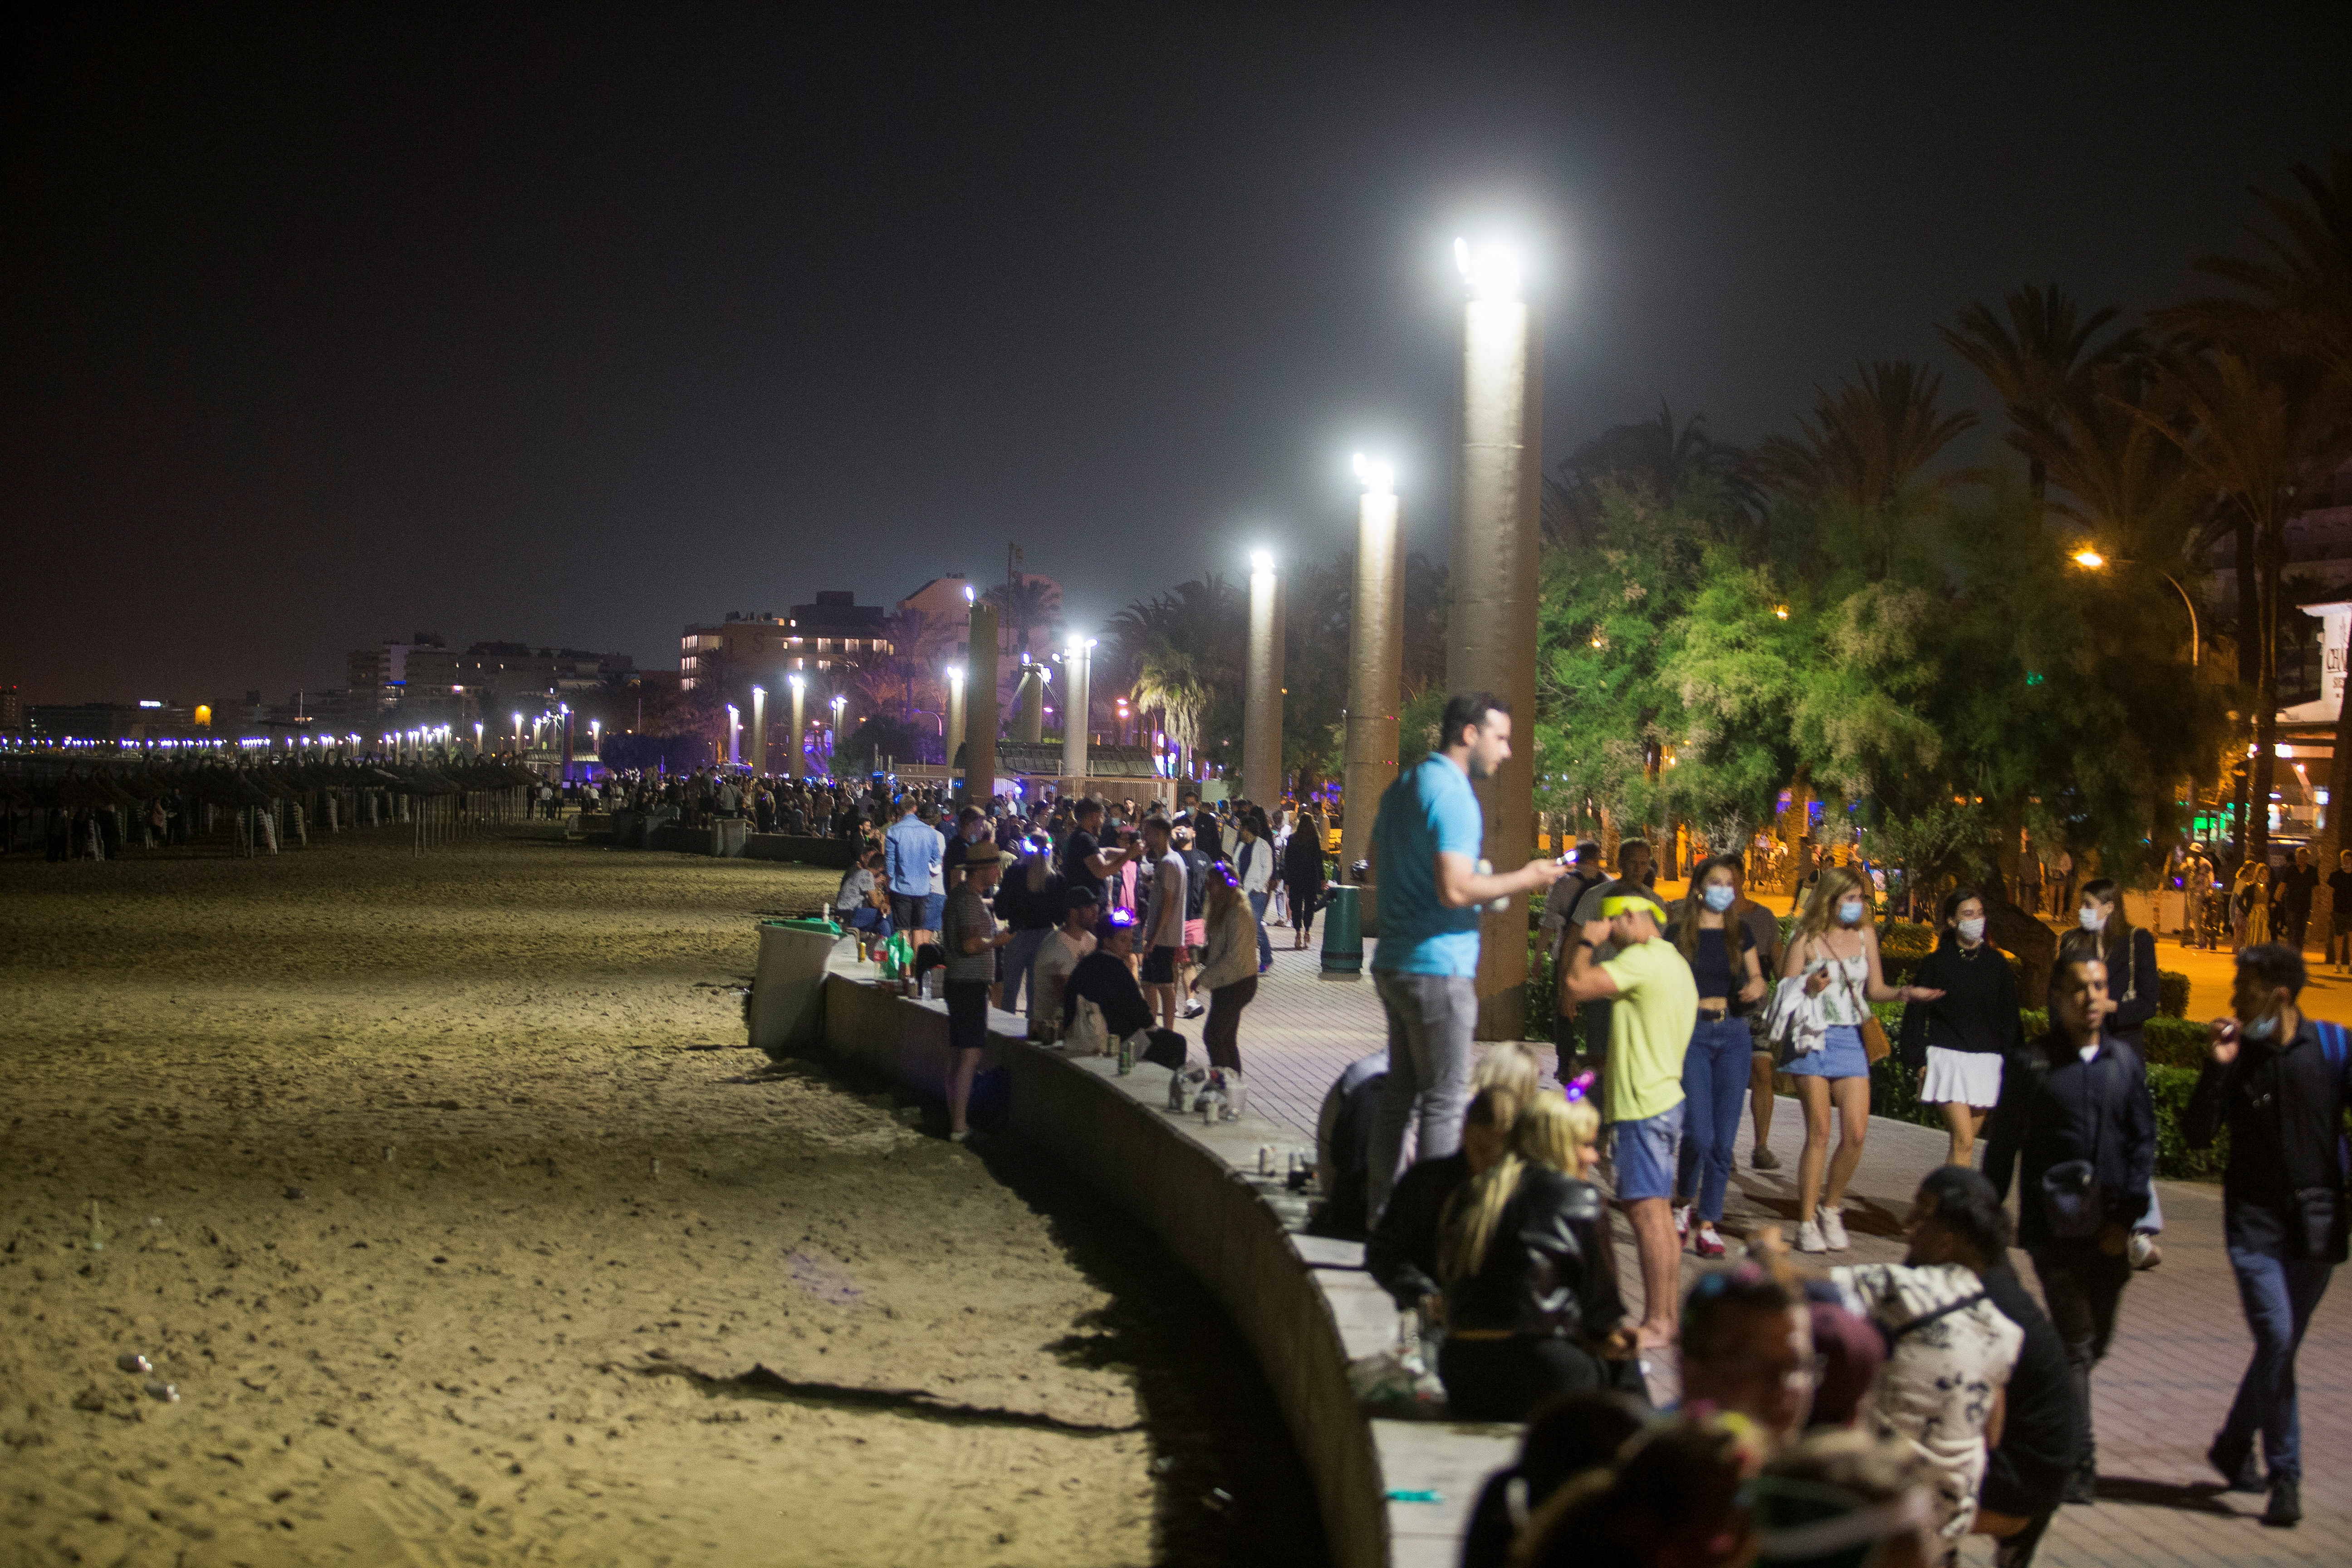 People party in Playa de Palma beach on the island of Mallorca, as Spanish regions with a low coronavirus disease (COVID-19) infection rate were allowed to reopen nightlife with some restrictions, in Mallorca, Spain, June 5, 2021. REUTERS/Enrique Calvo